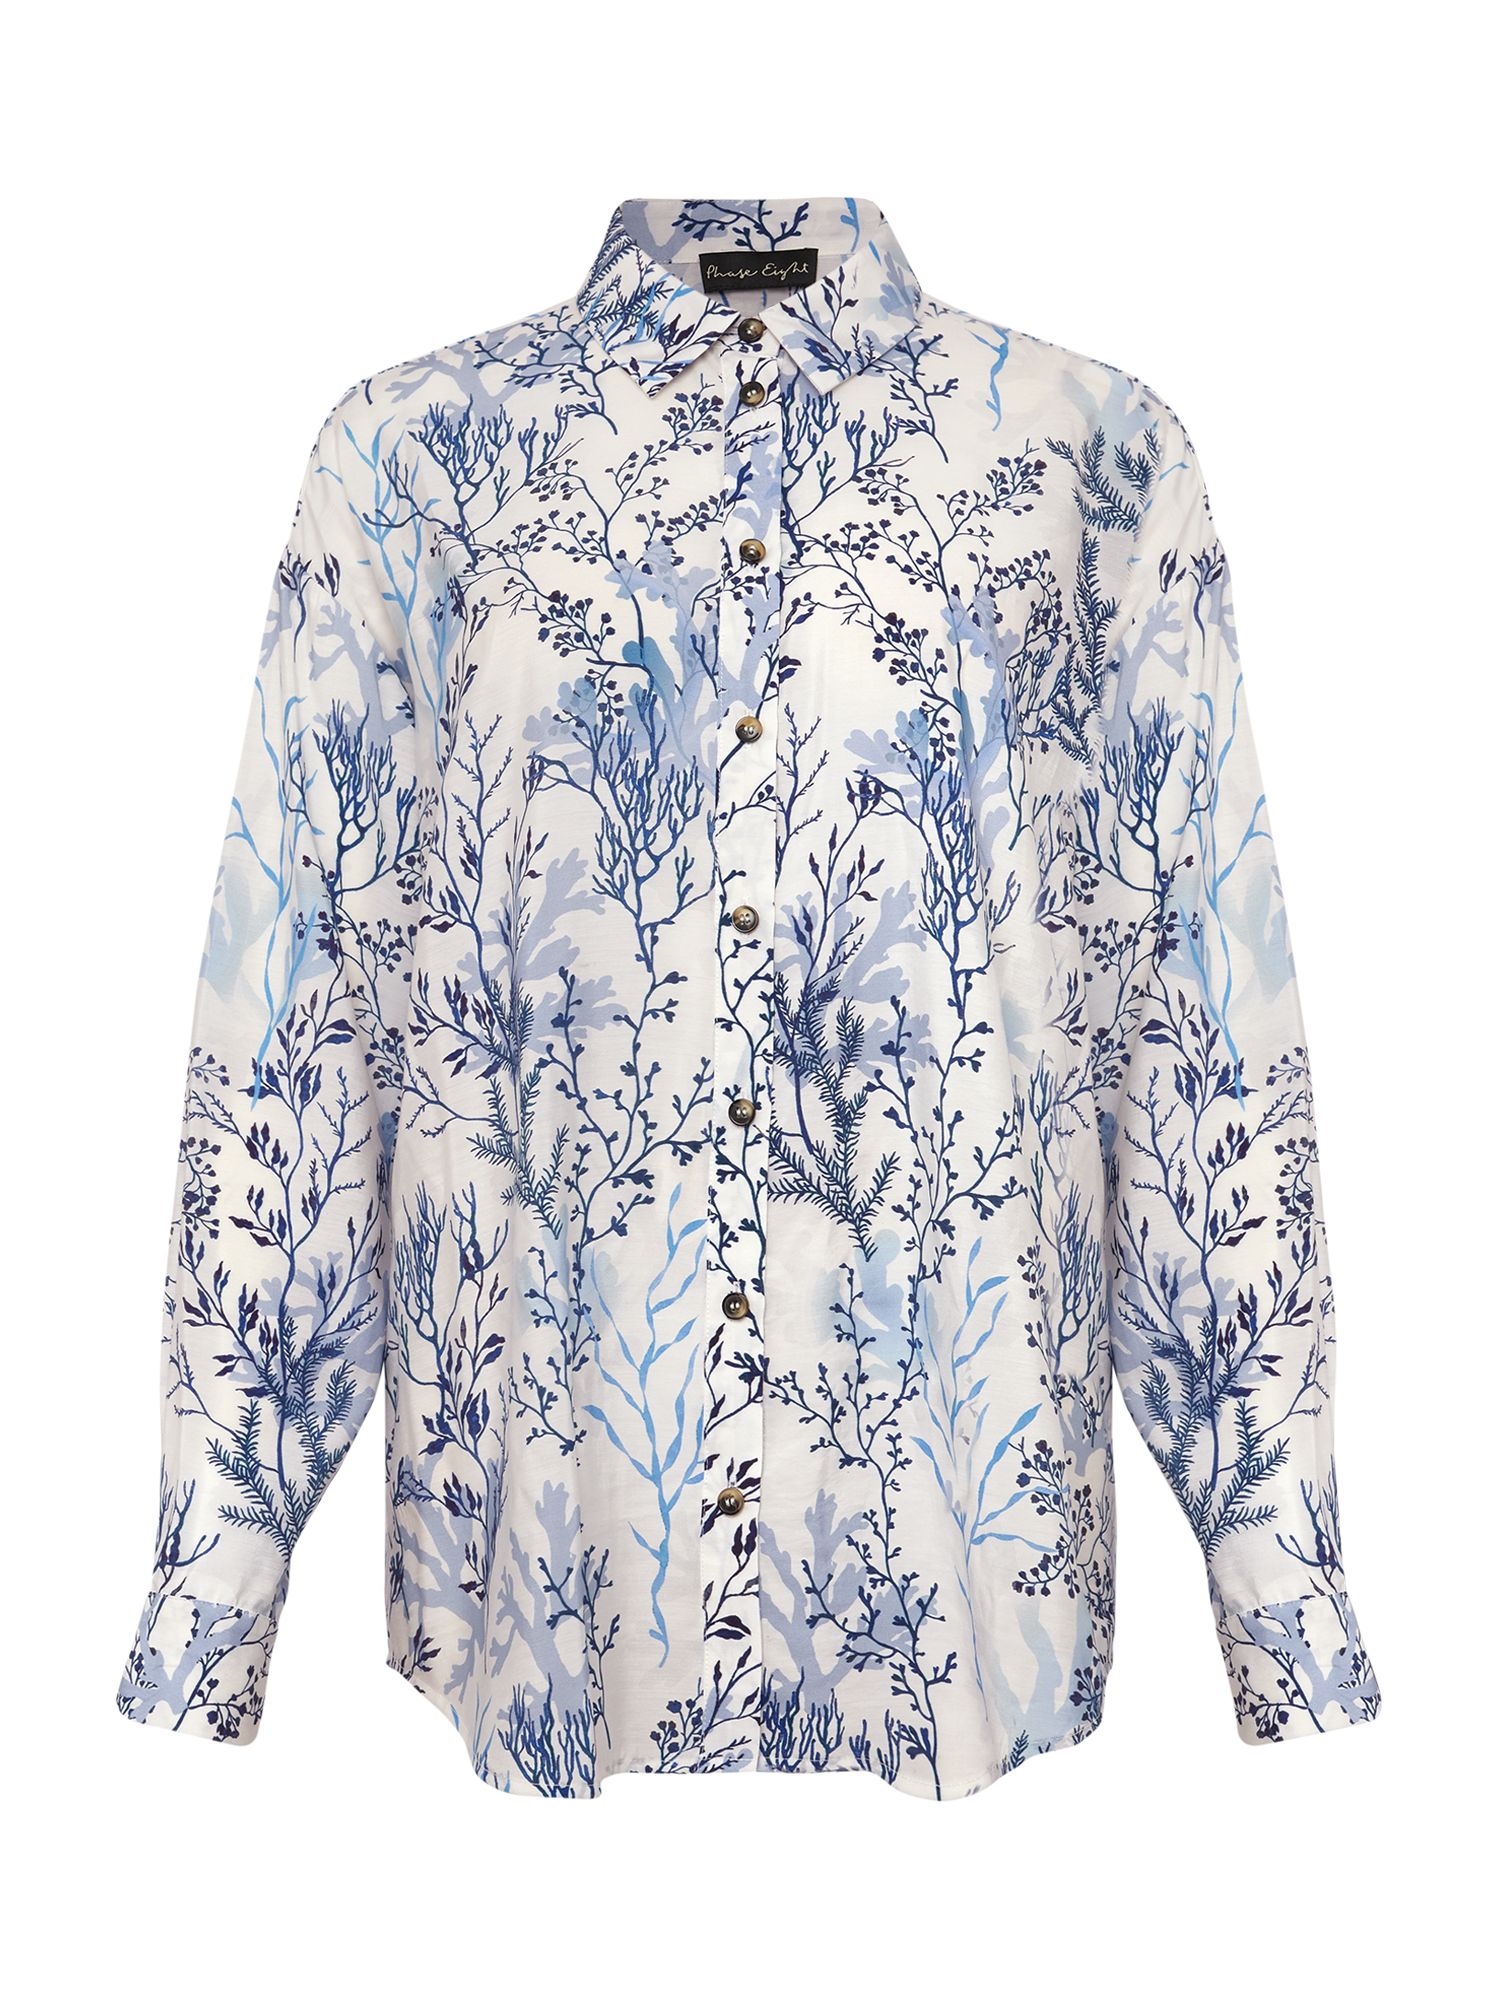 Phase Eight Claire Coral Print Shirt, Blue/Ivory at John Lewis & Partners